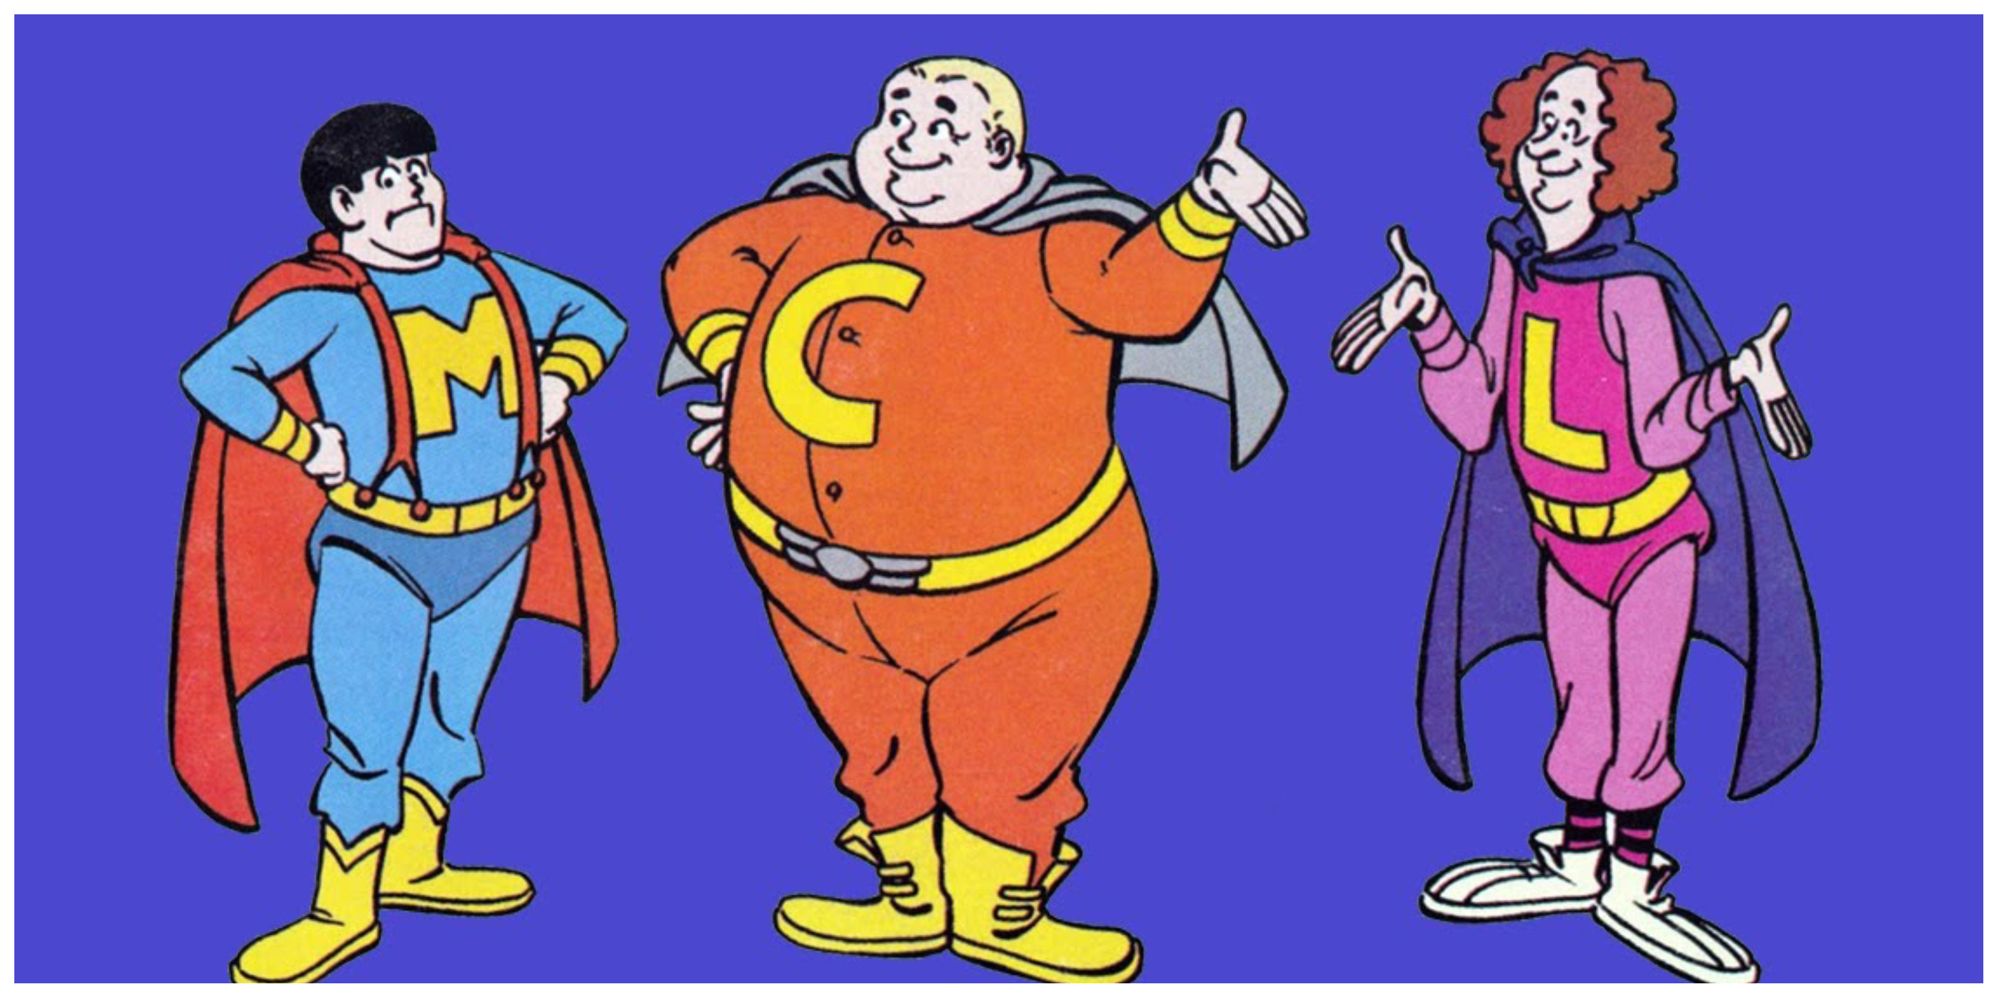 The Three Robonic Stooges in their Superhero Costumes 